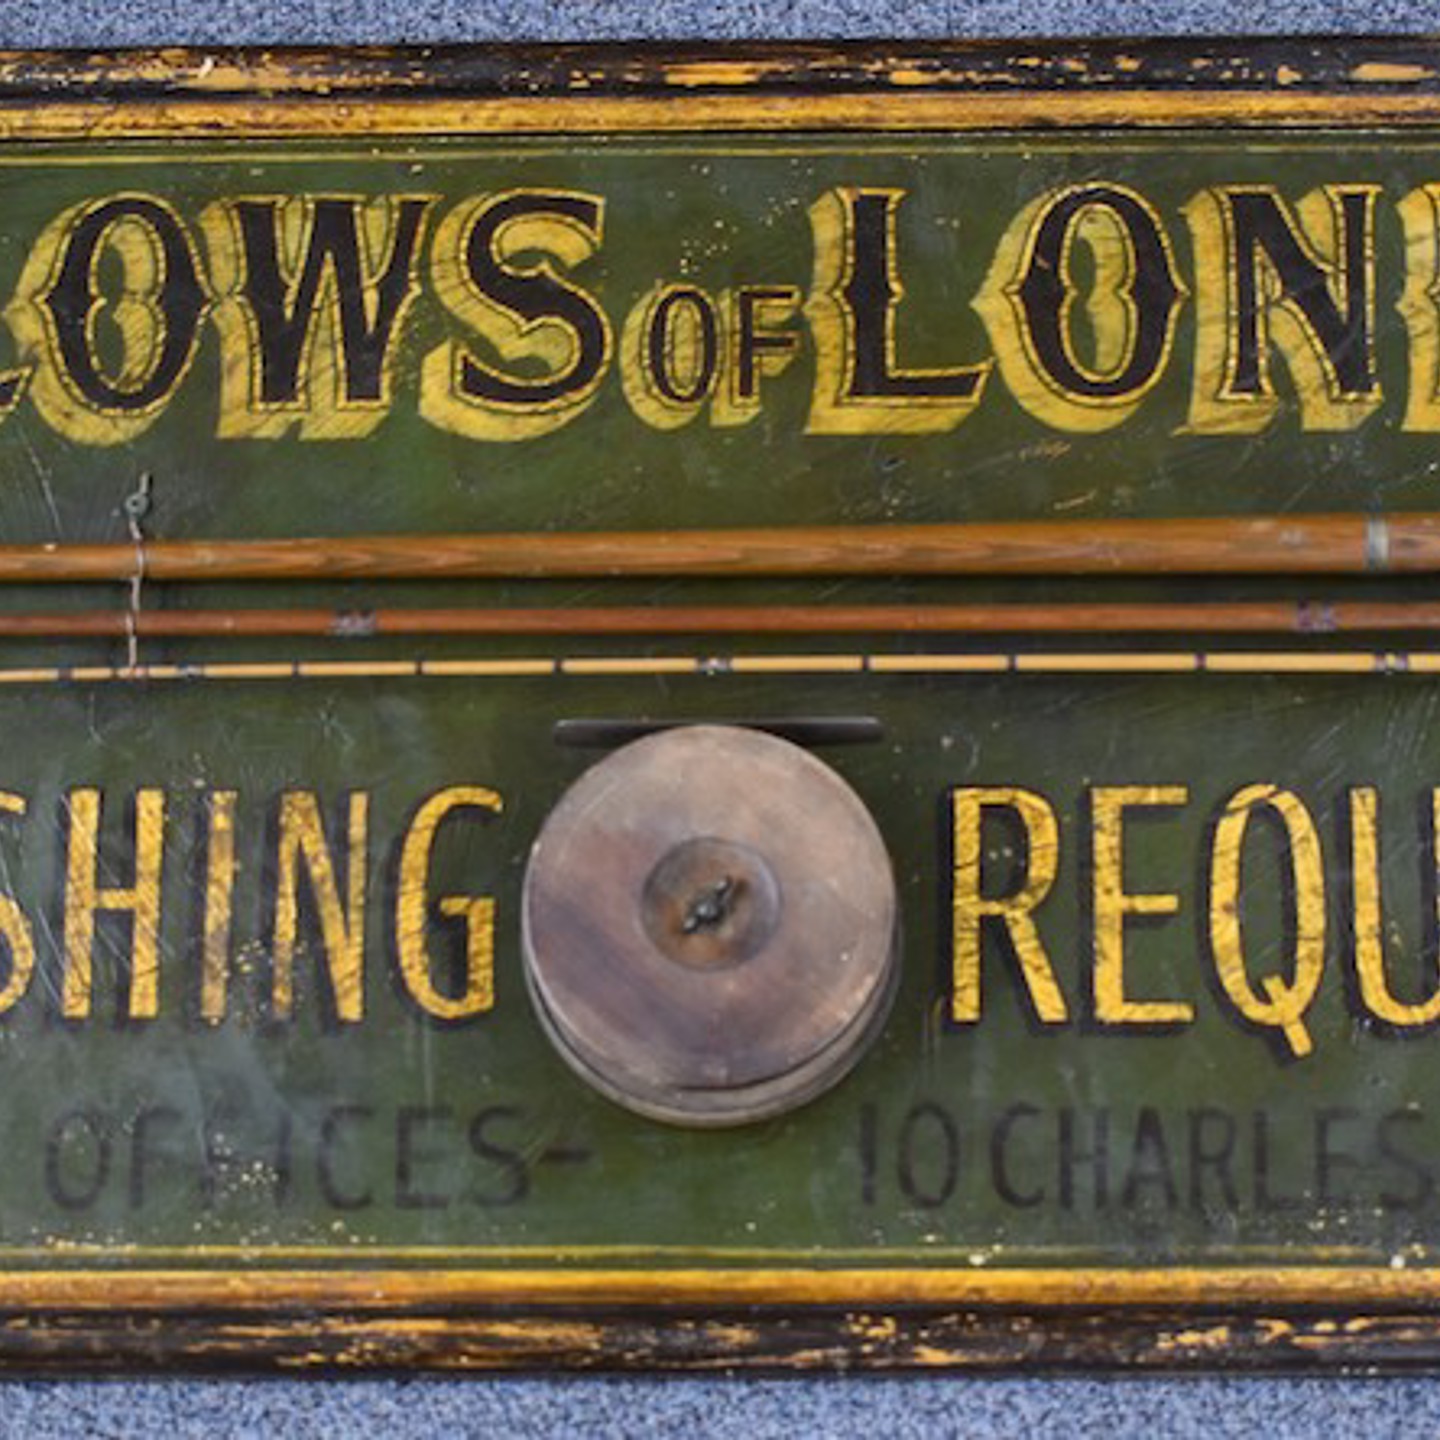 Arlows Of London Hand Painted Wooden Shop Display Or Advertising Sign 'Fine Fishing Requisites Registered Offices 10 Charles St London W.' Sold For £300